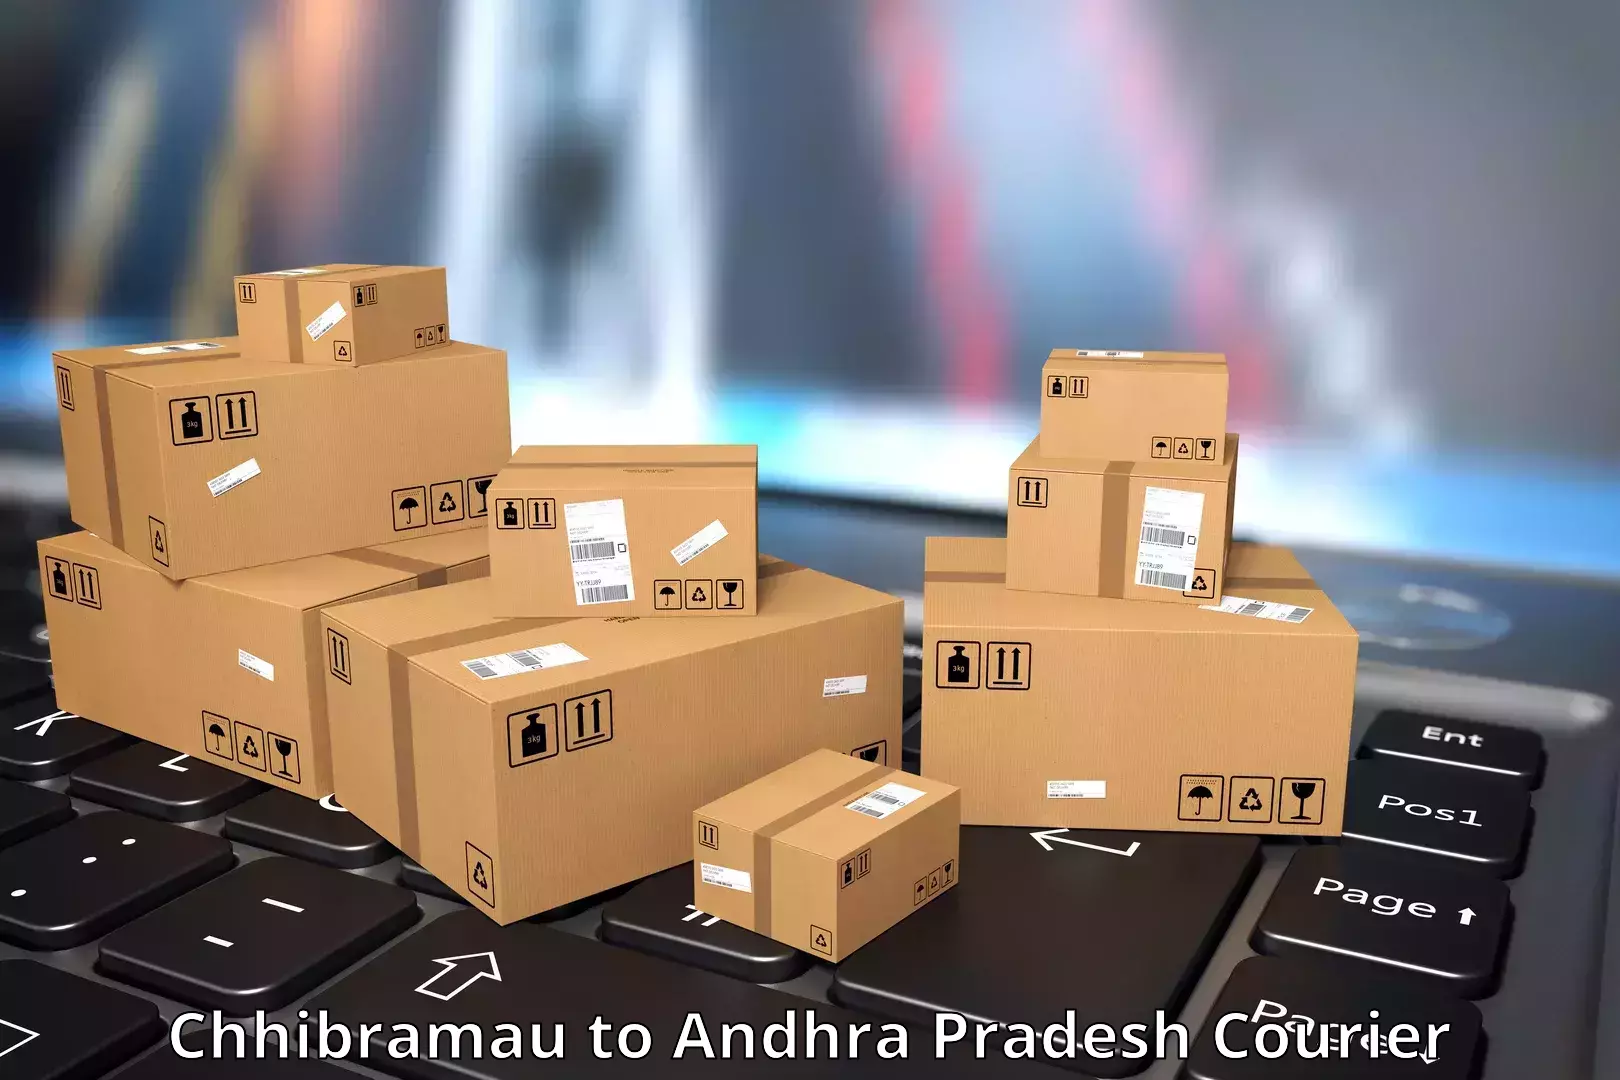 Easy access courier services in Chhibramau to Yellamanchili